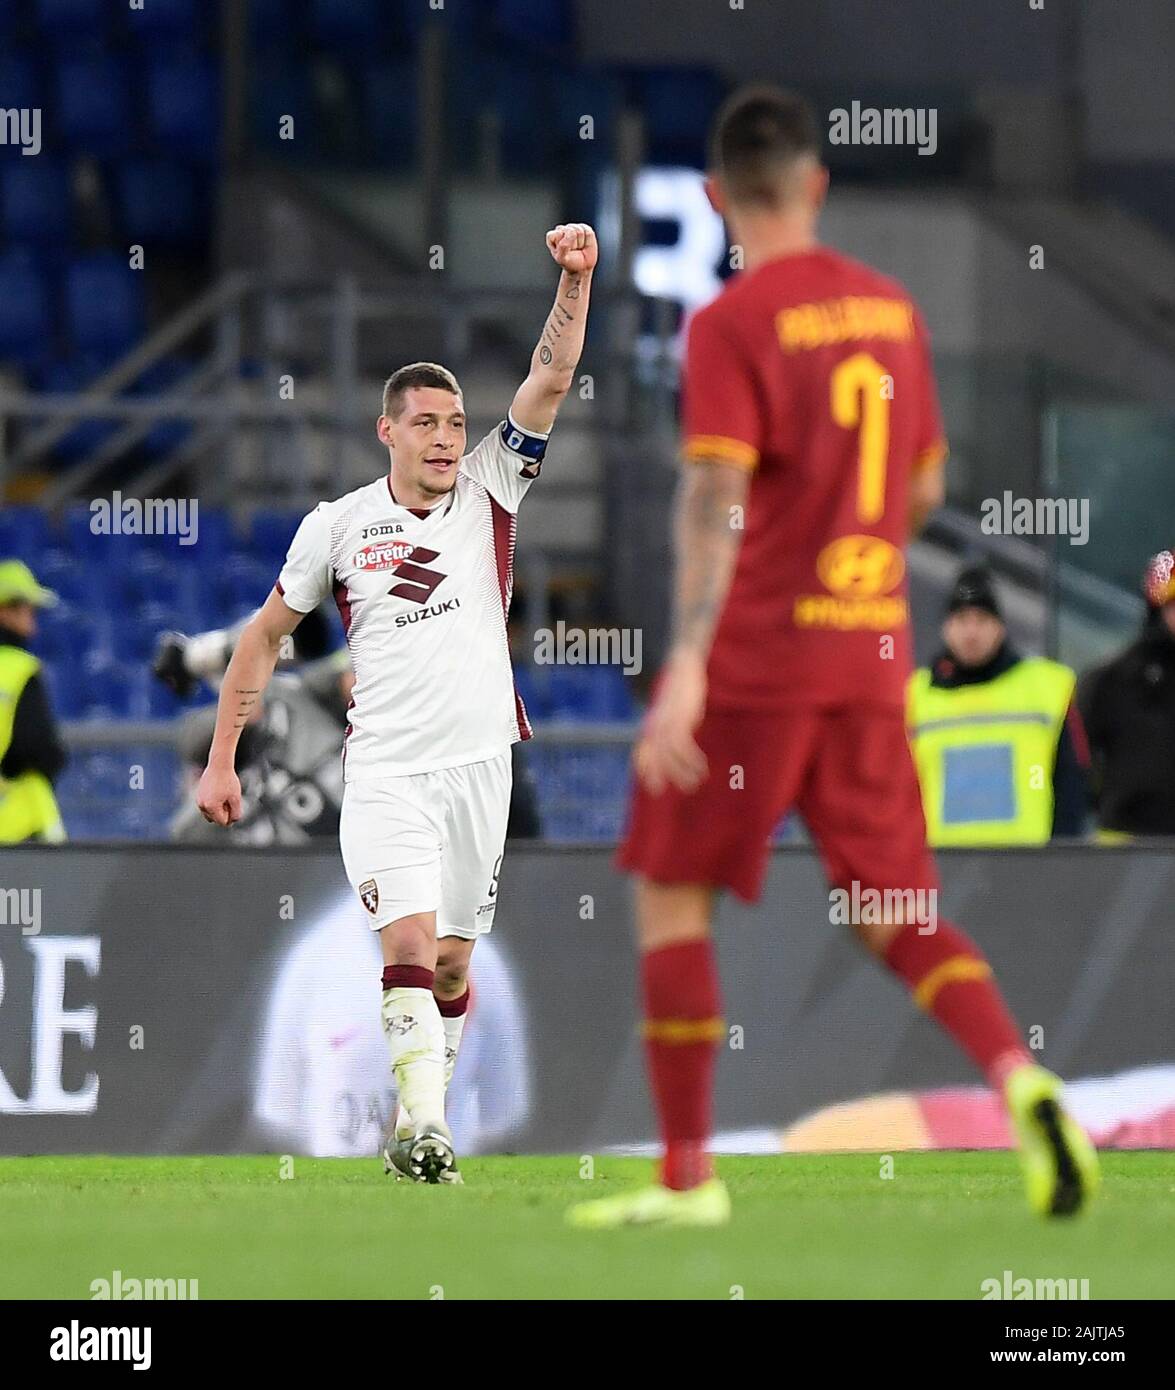 Rome, Italy. 5th Jan, 2020. Torino's Andrea Belotti (L) celebrates during a Serie A soccer match between Roma and Torino in Rome, Italy, Jan. 5, 2020. Credit: Alberto Lingria/Xinhua/Alamy Live News Stock Photo